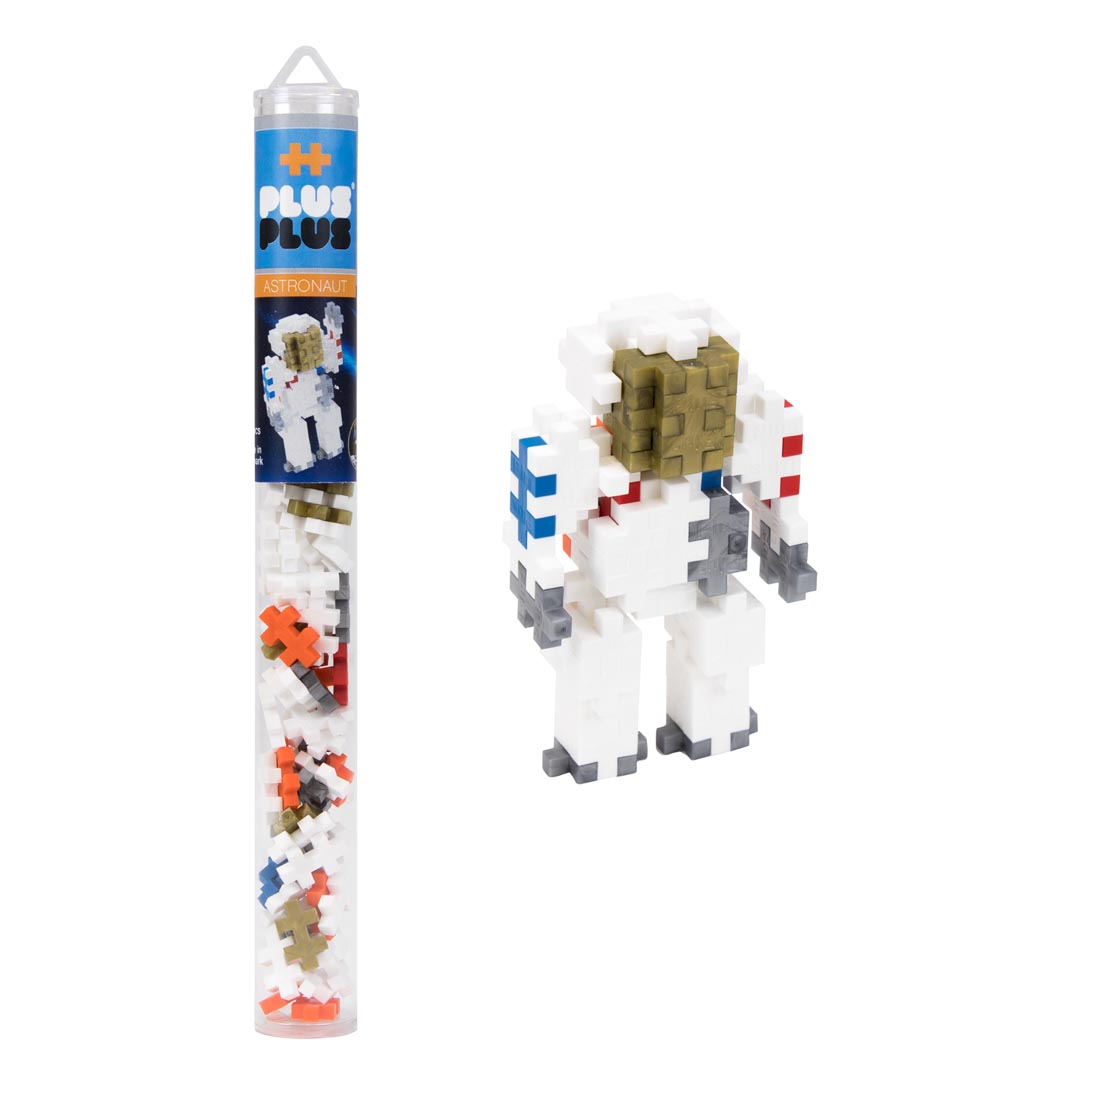 Plus-Plus 70-Piece Astronaut Tube beside a completed sample creation